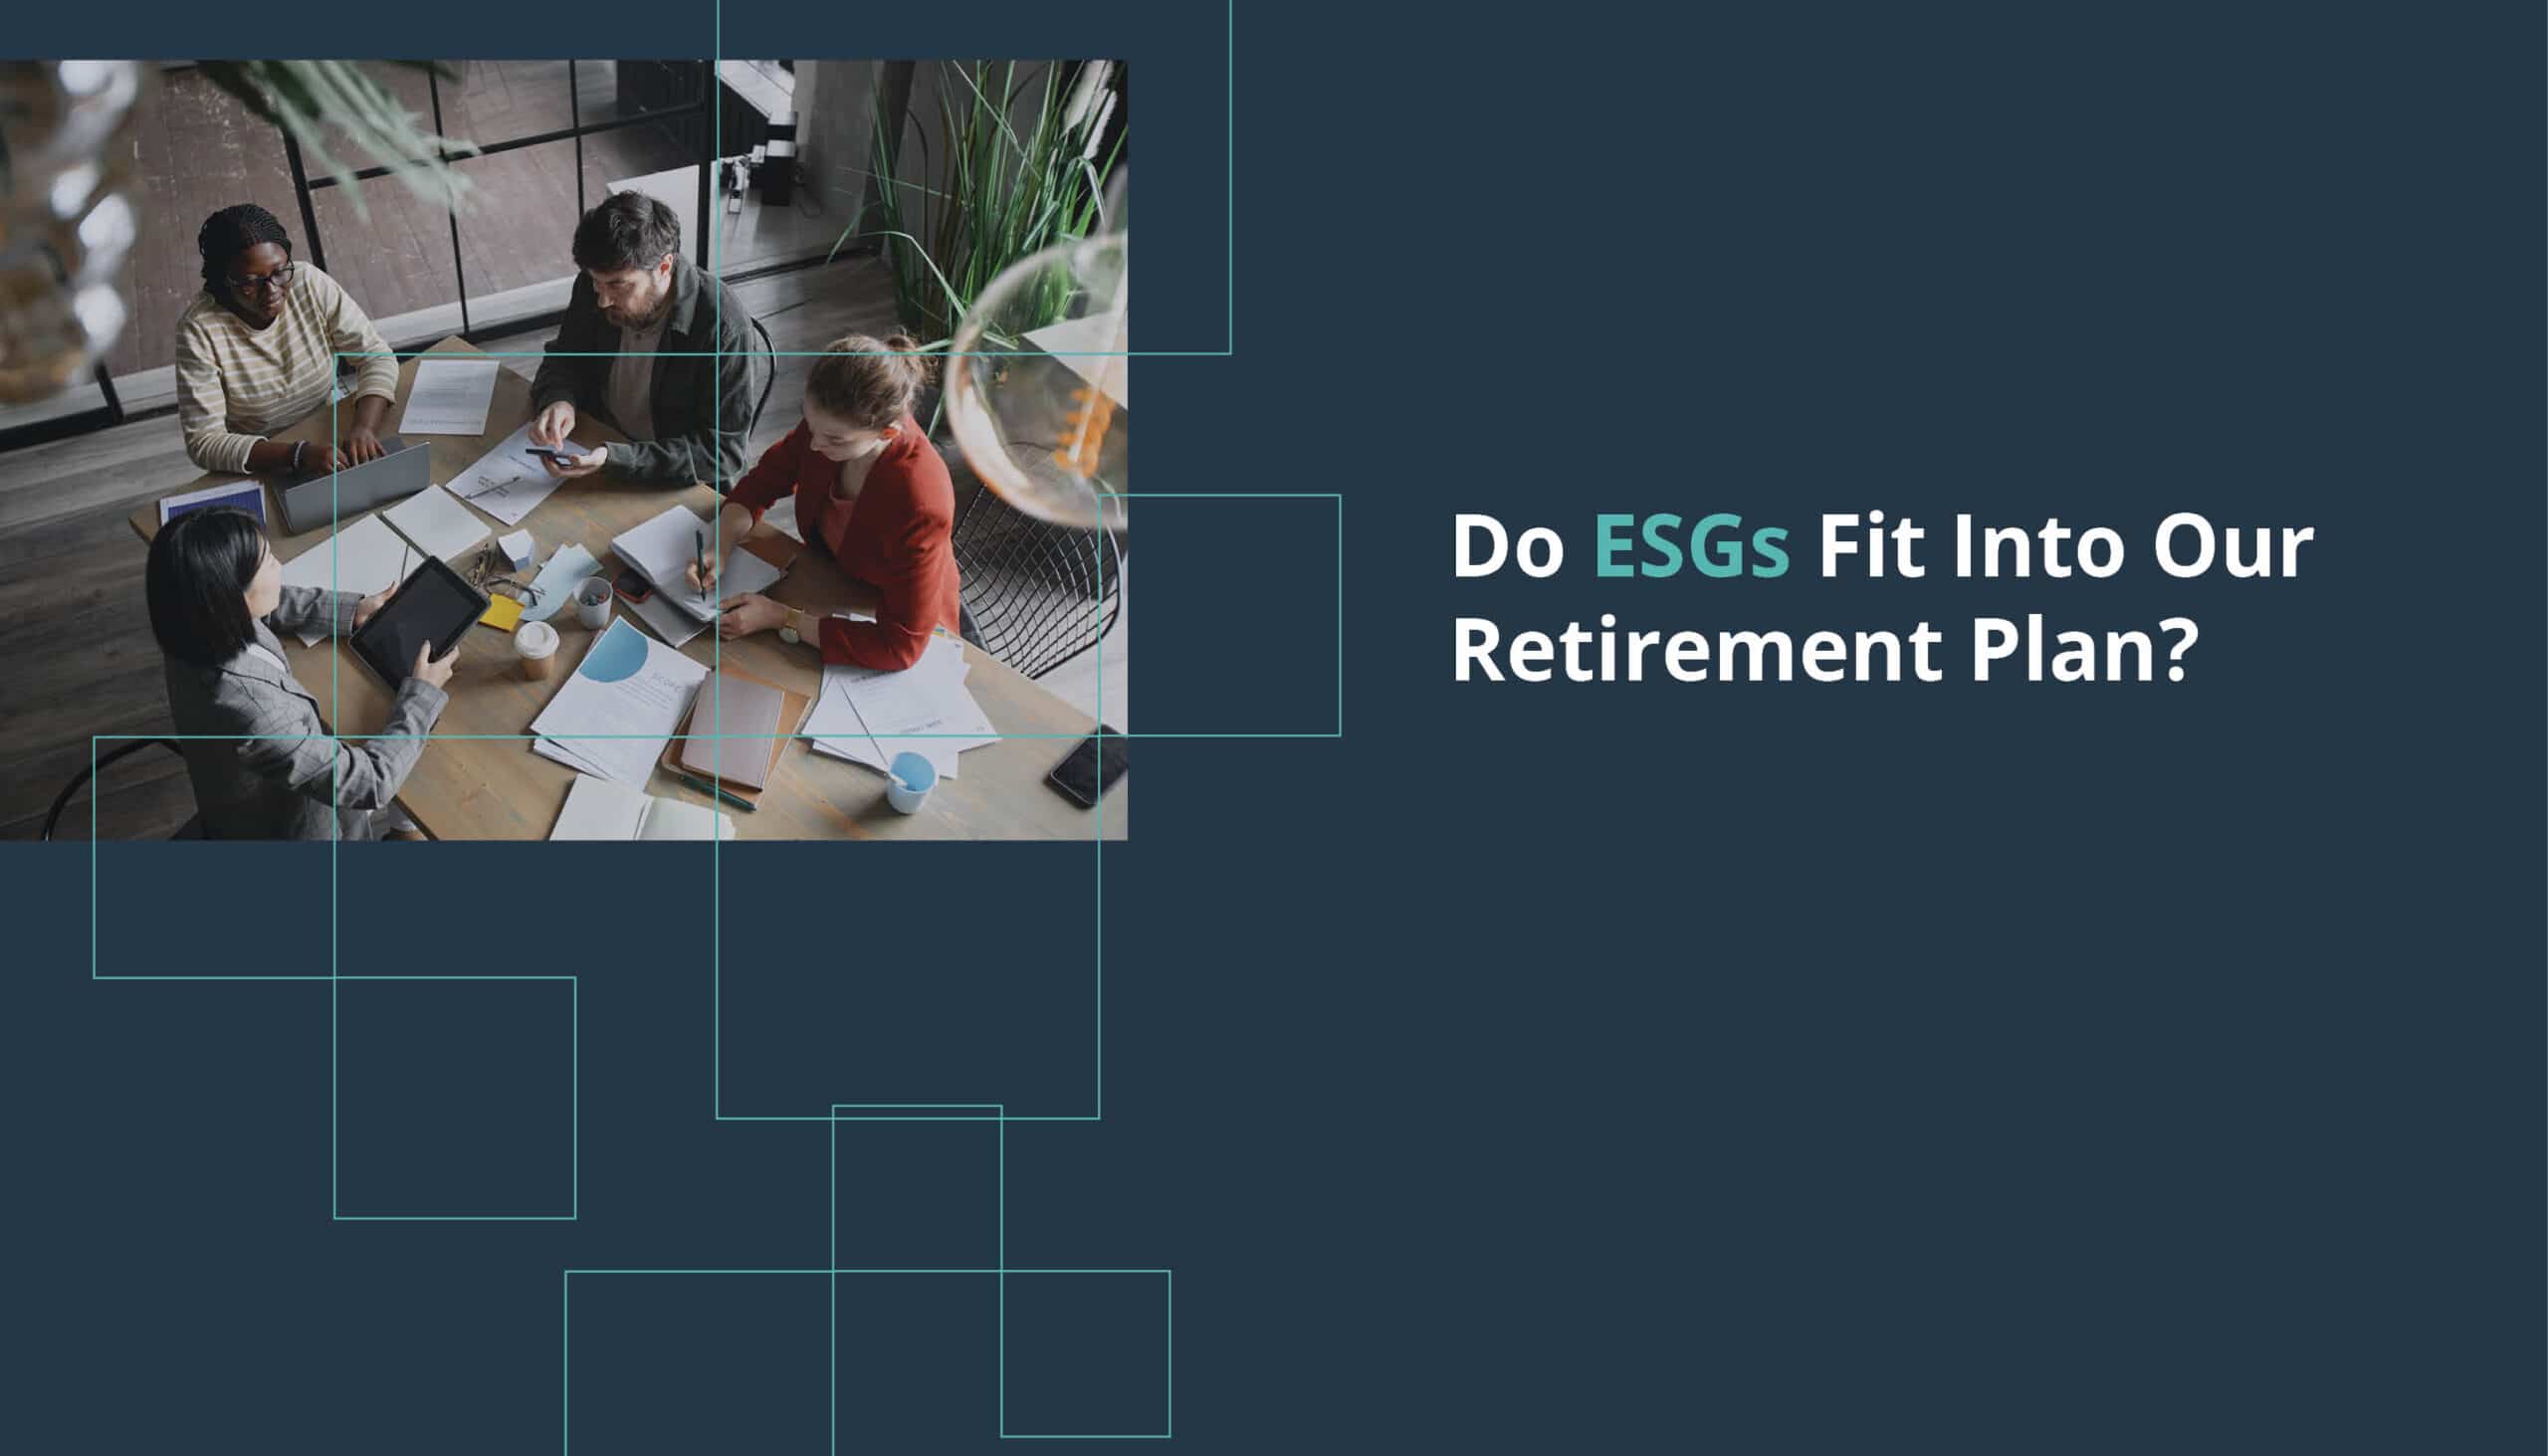 Do ESGs Fit Into Our Retirement Plan?